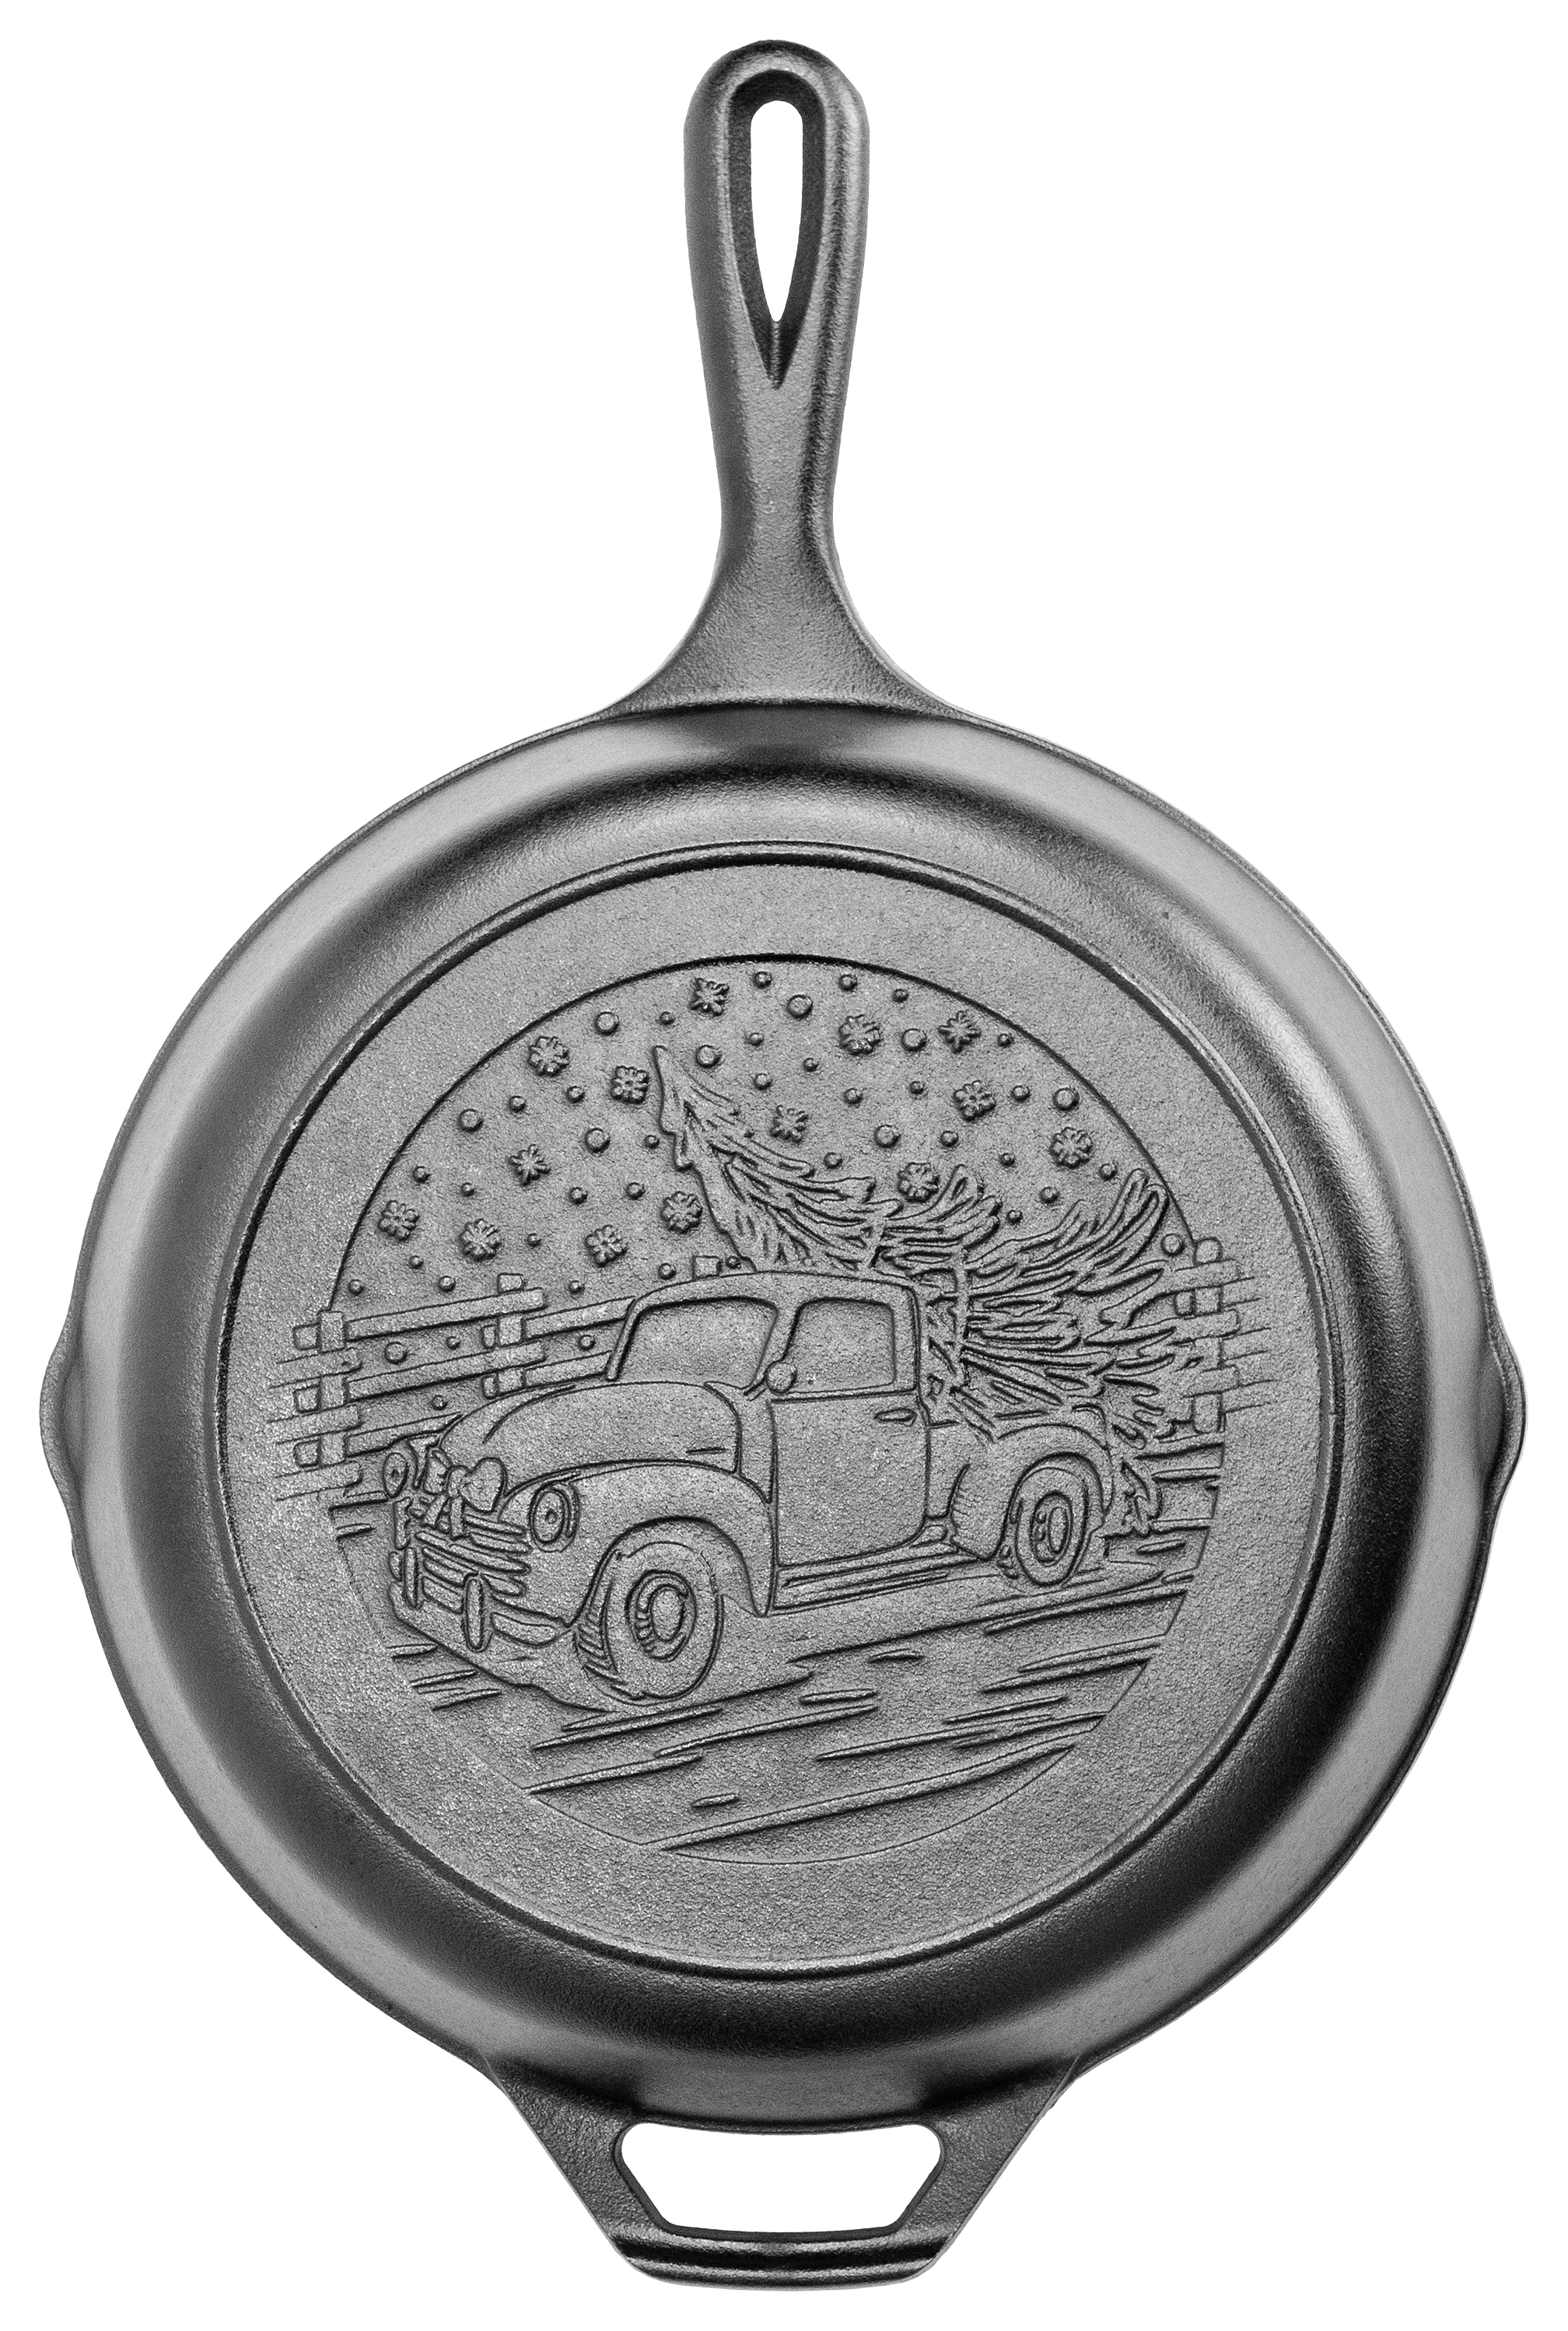 Lodge Cast-Iron Skillet with Holiday Truck Scene